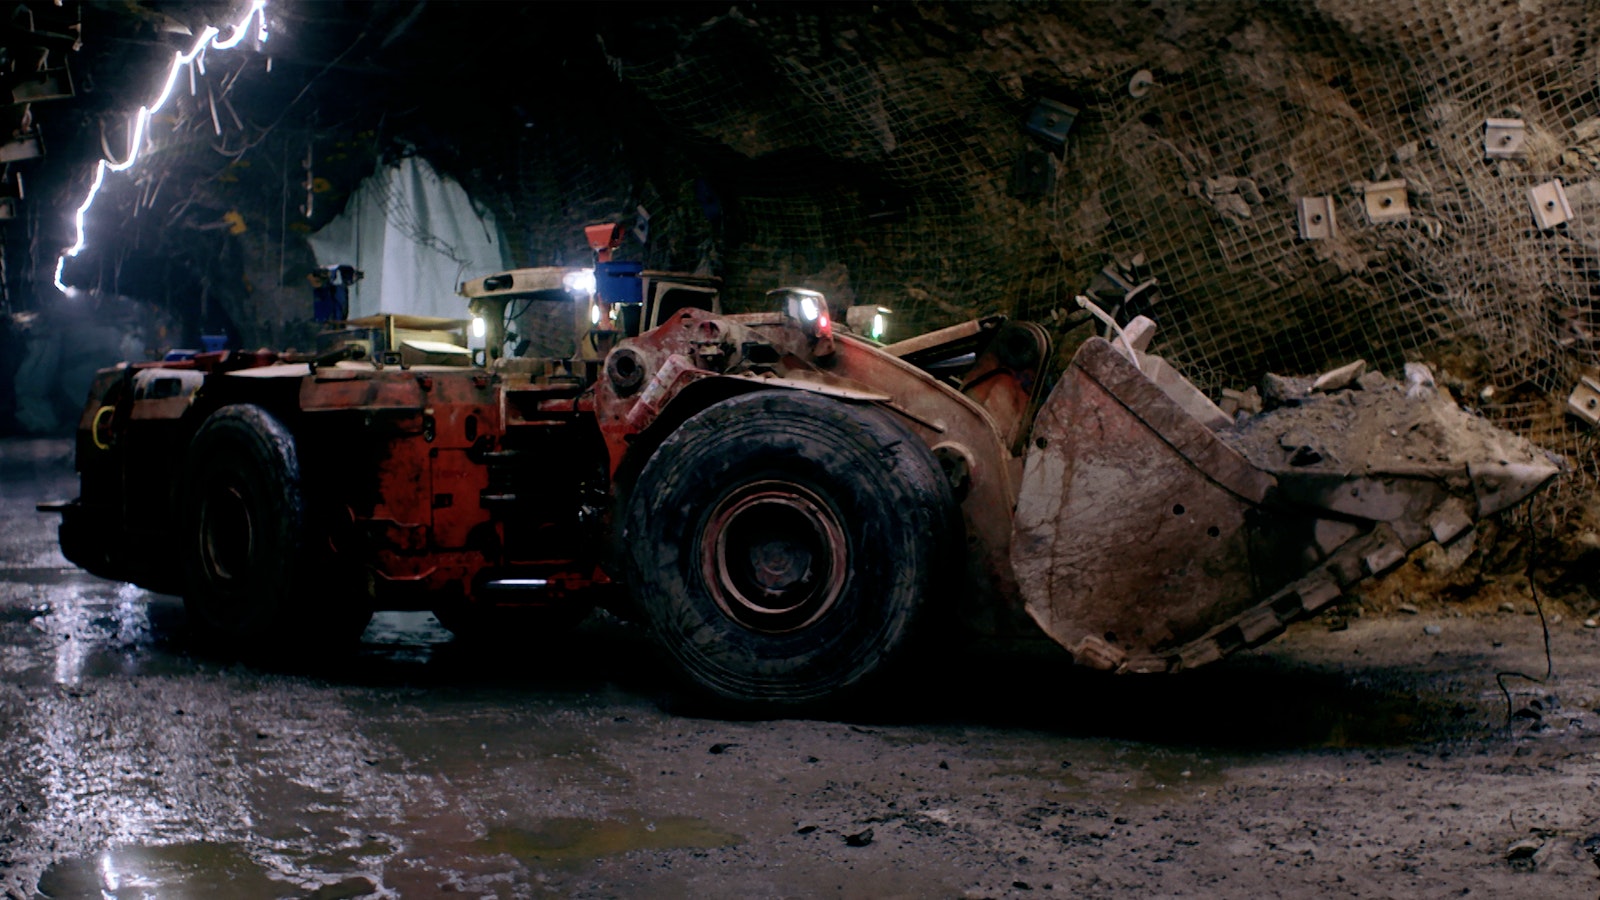 A large yellow mining truck with huge black wheels navigates the mine tunnel, with no human driver in the cab.